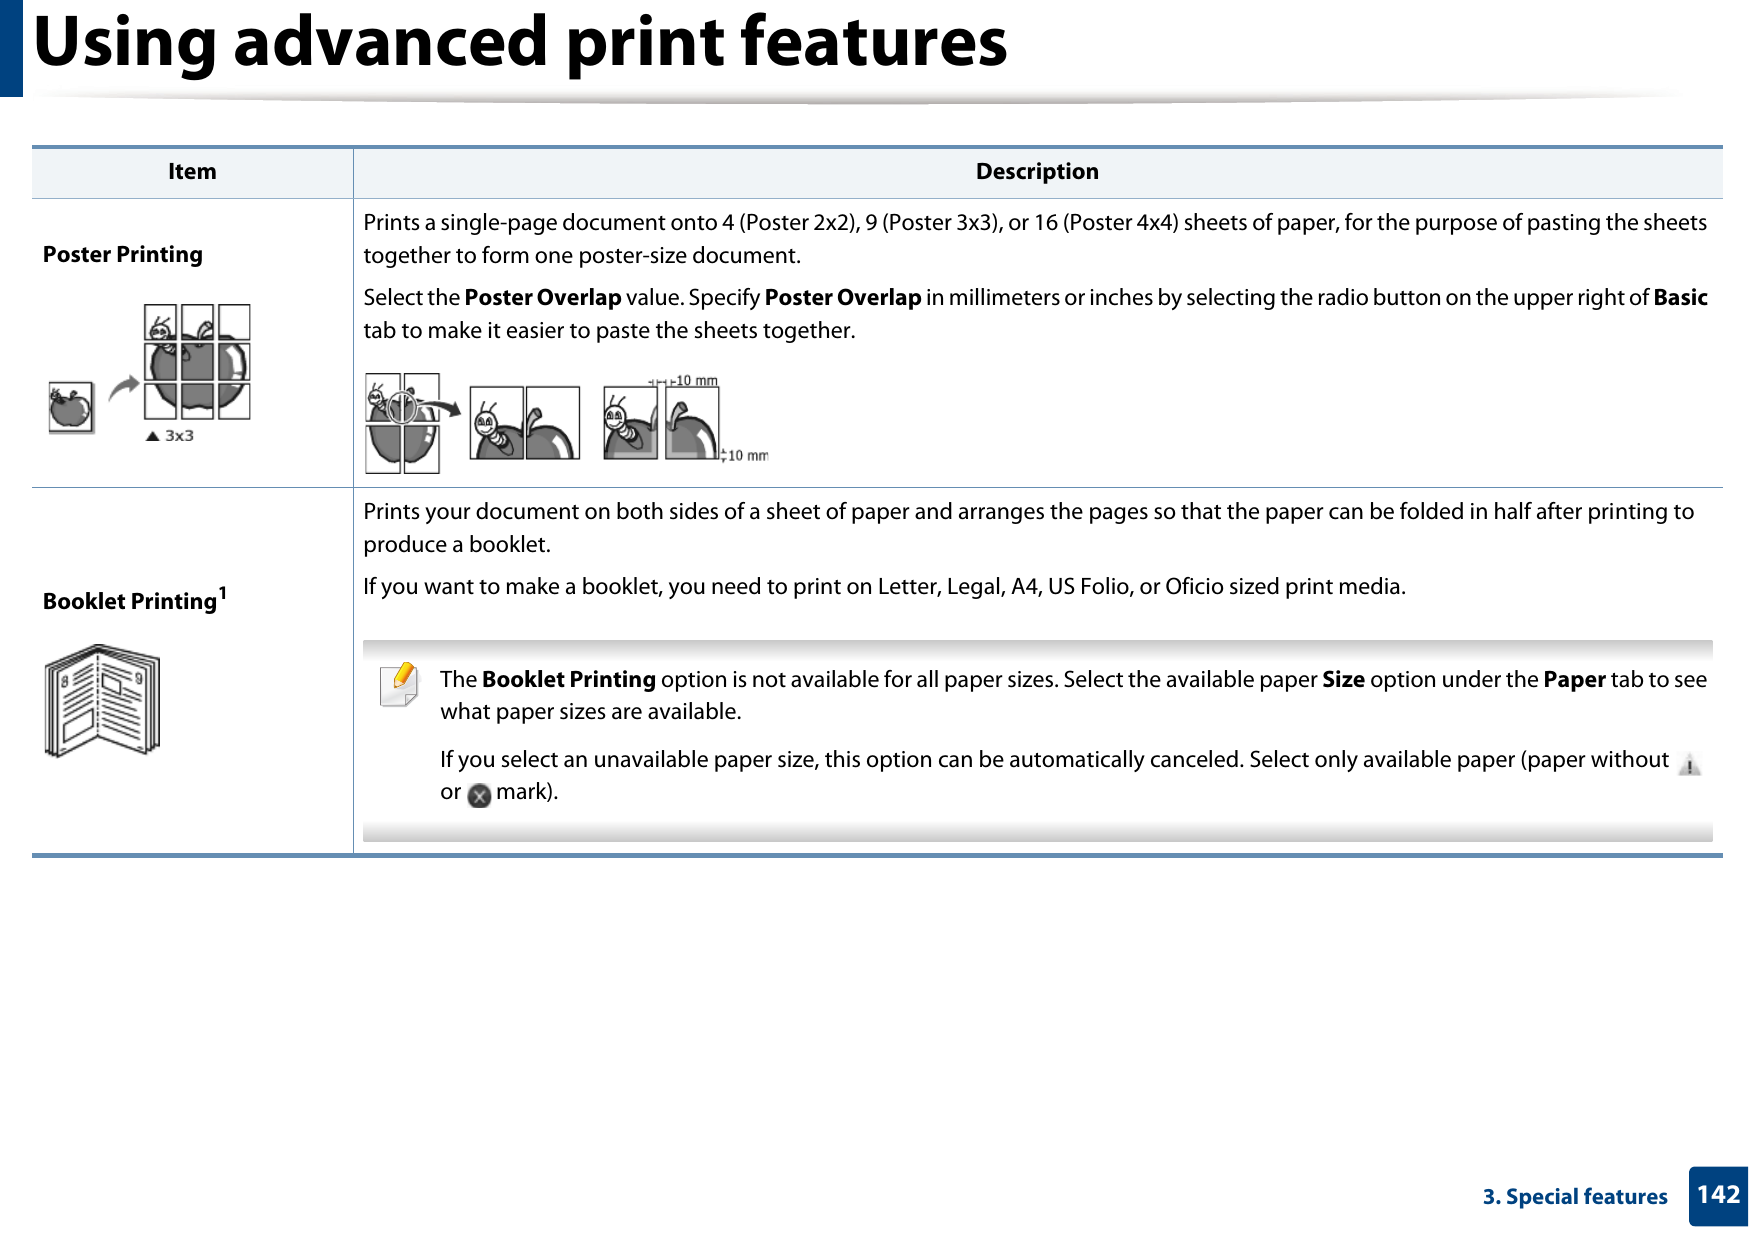 Using advanced print features1423. Special featuresPoster PrintingPrints a single-page document onto 4 (Poster 2x2), 9 (Poster 3x3), or 16 (Poster 4x4) sheets of paper, for the purpose of pasting the sheets together to form one poster-size document.Select the Poster Overlap value. Specify Poster Overlap in millimeters or inches by selecting the radio button on the upper right of Basic tab to make it easier to paste the sheets together.Booklet Printing1Prints your document on both sides of a sheet of paper and arranges the pages so that the paper can be folded in half after printing to produce a booklet.If you want to make a booklet, you need to print on Letter, Legal, A4, US Folio, or Oficio sized print media.  The Booklet Printing option is not available for all paper sizes. Select the available paper Size option under the Paper tab to see what paper sizes are available.If you select an unavailable paper size, this option can be automatically canceled. Select only available paper (paper without   or  mark). Item Description